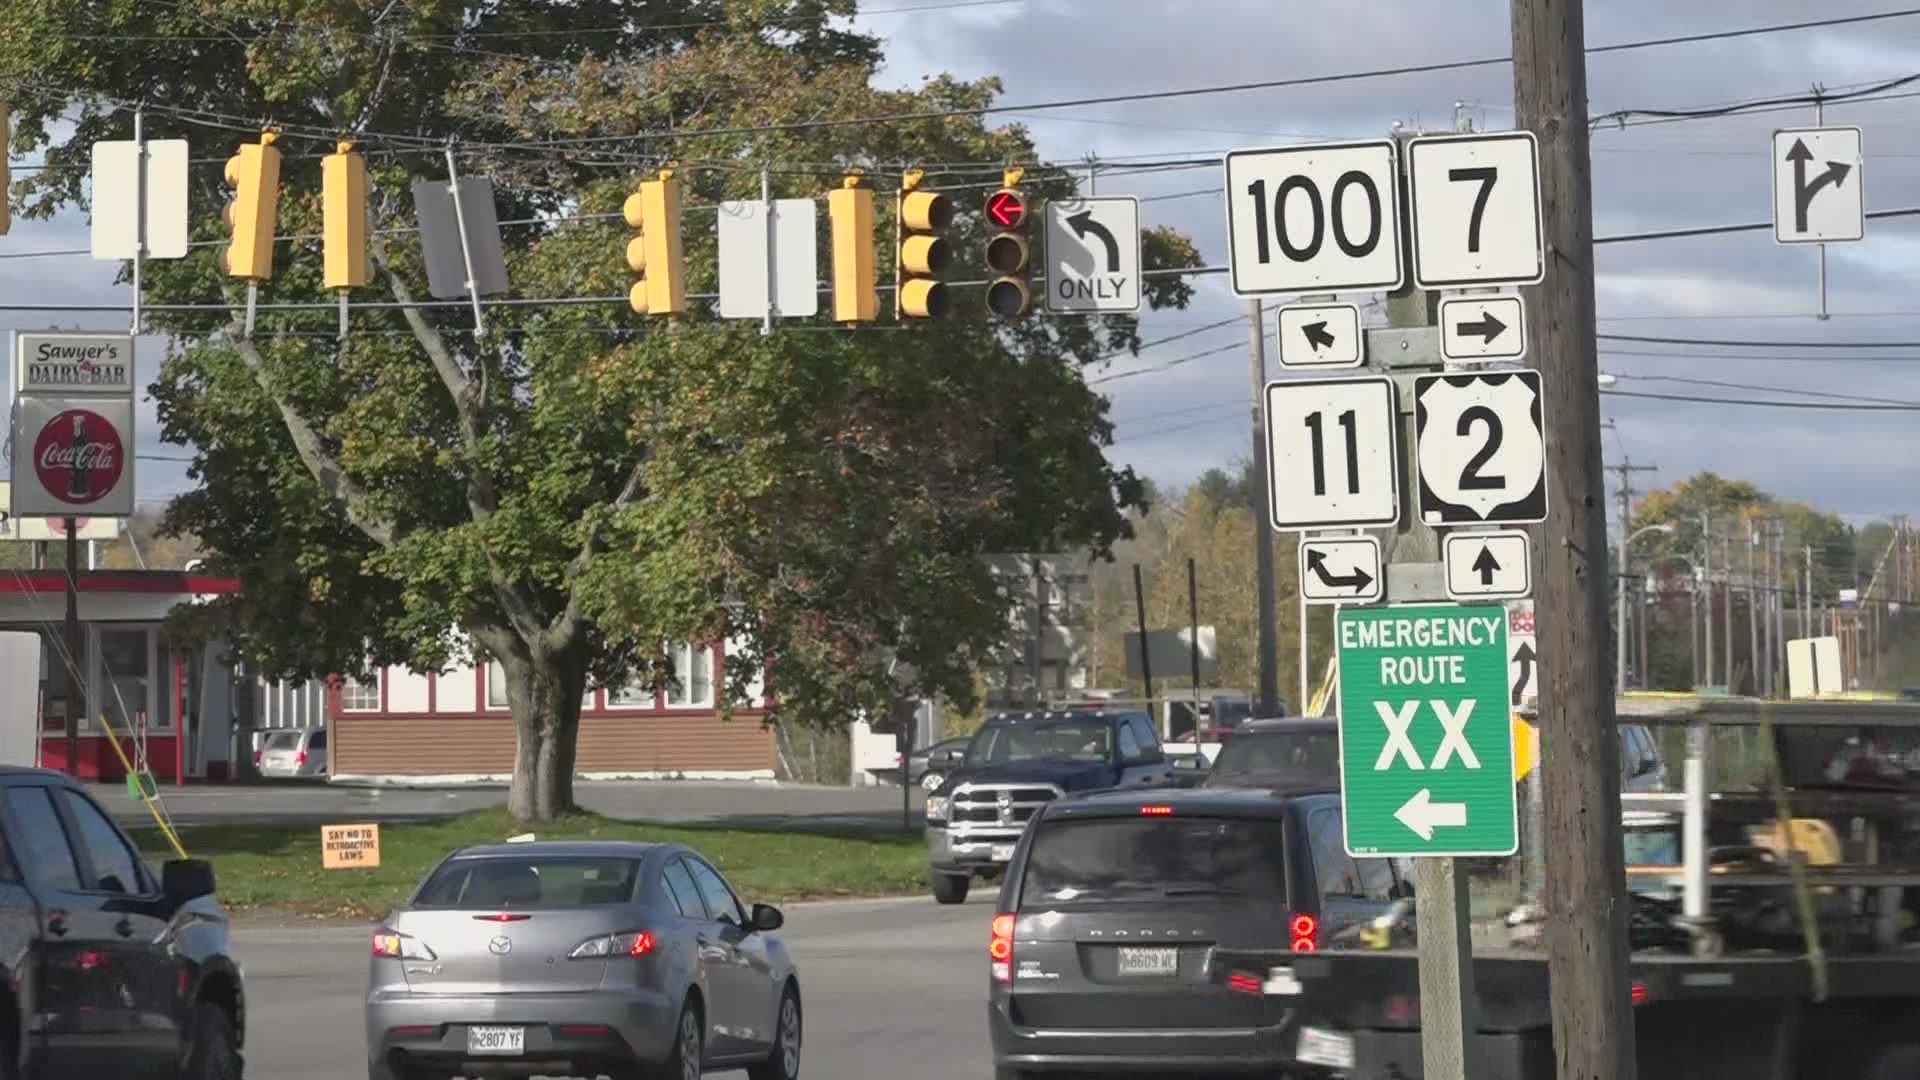 Sen. Susan Collins requested $45 million for 12 road improvement projects in Maine, one of which includes a busy intersection in Newport.